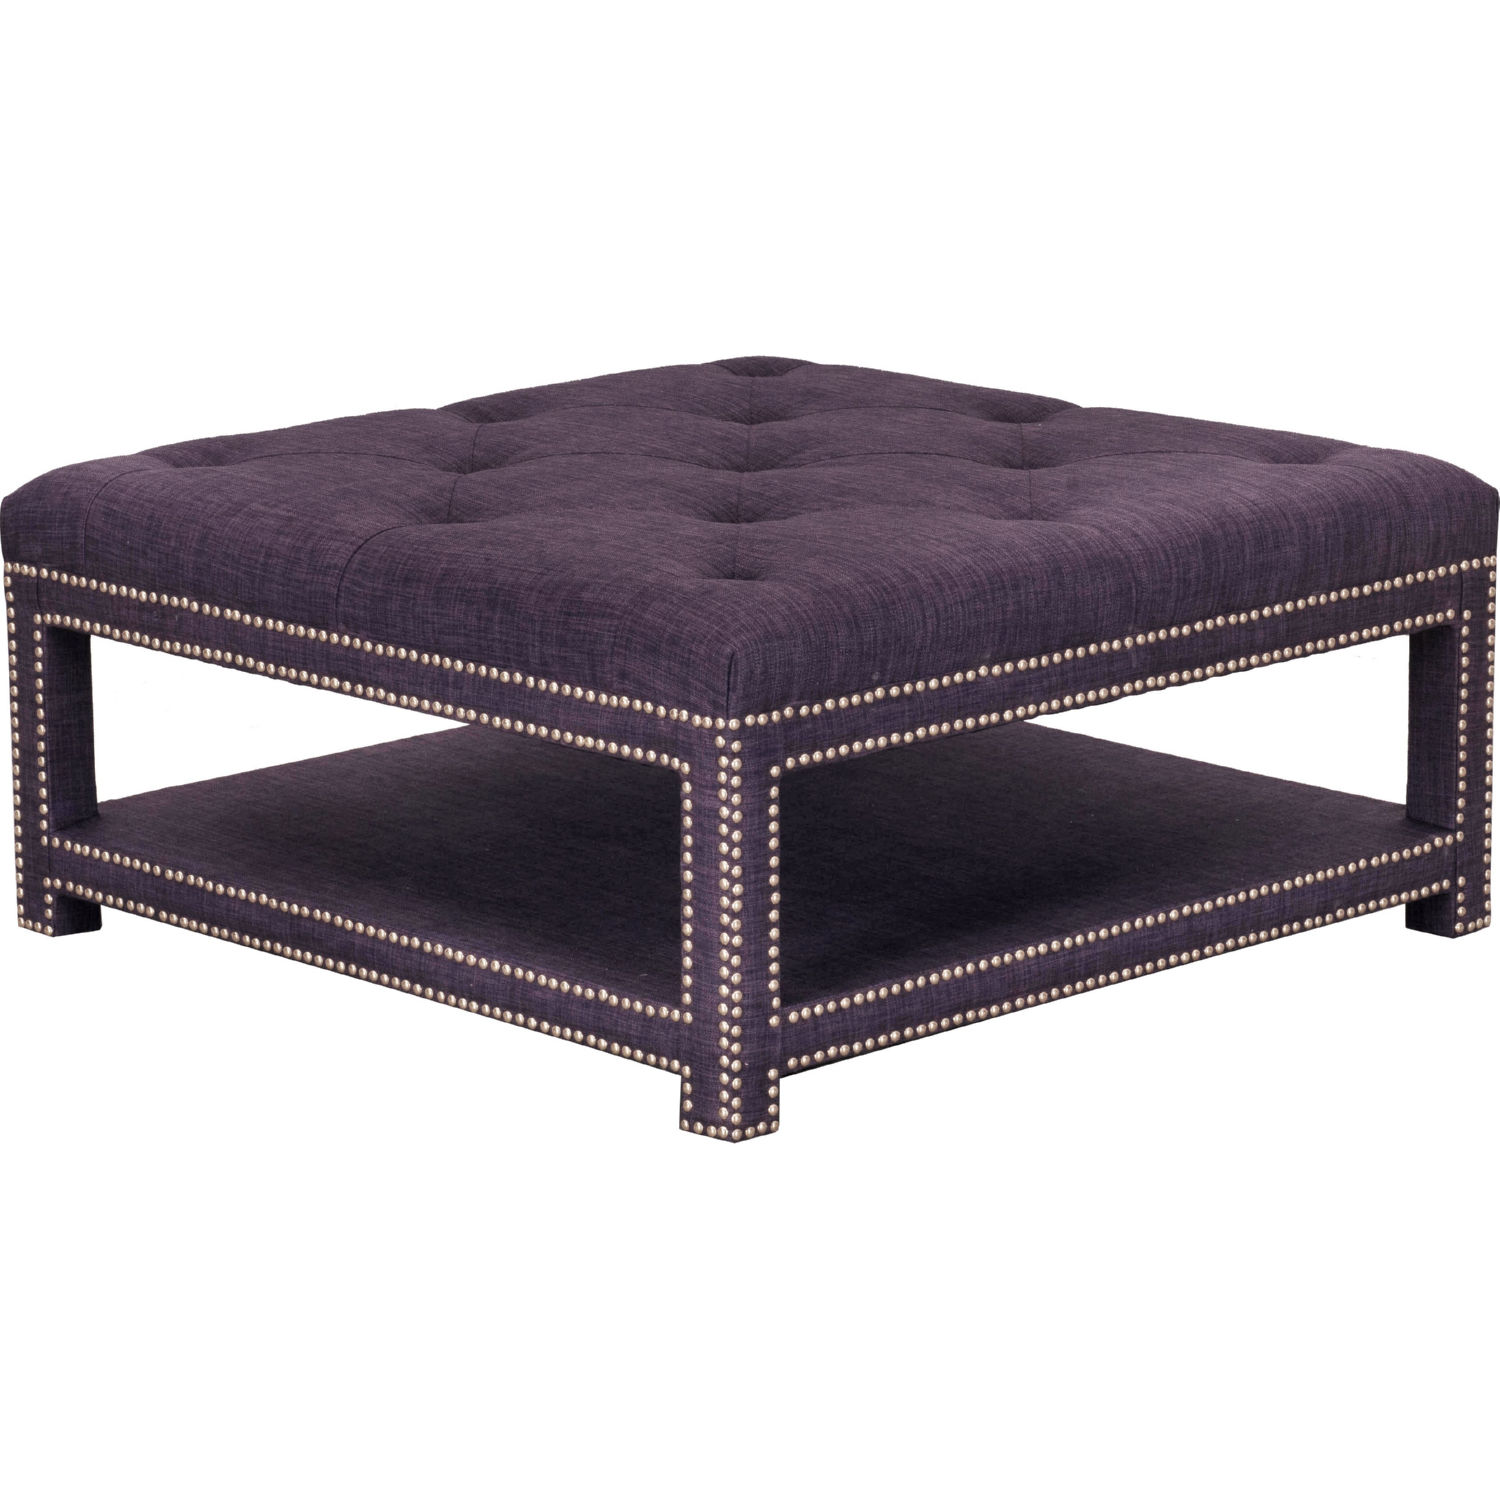 Chic Iconic Fct2785 Dr Bina Coffee Table Ottoman In Tufted Purple Linen W 2 Rows Nailhead Trim